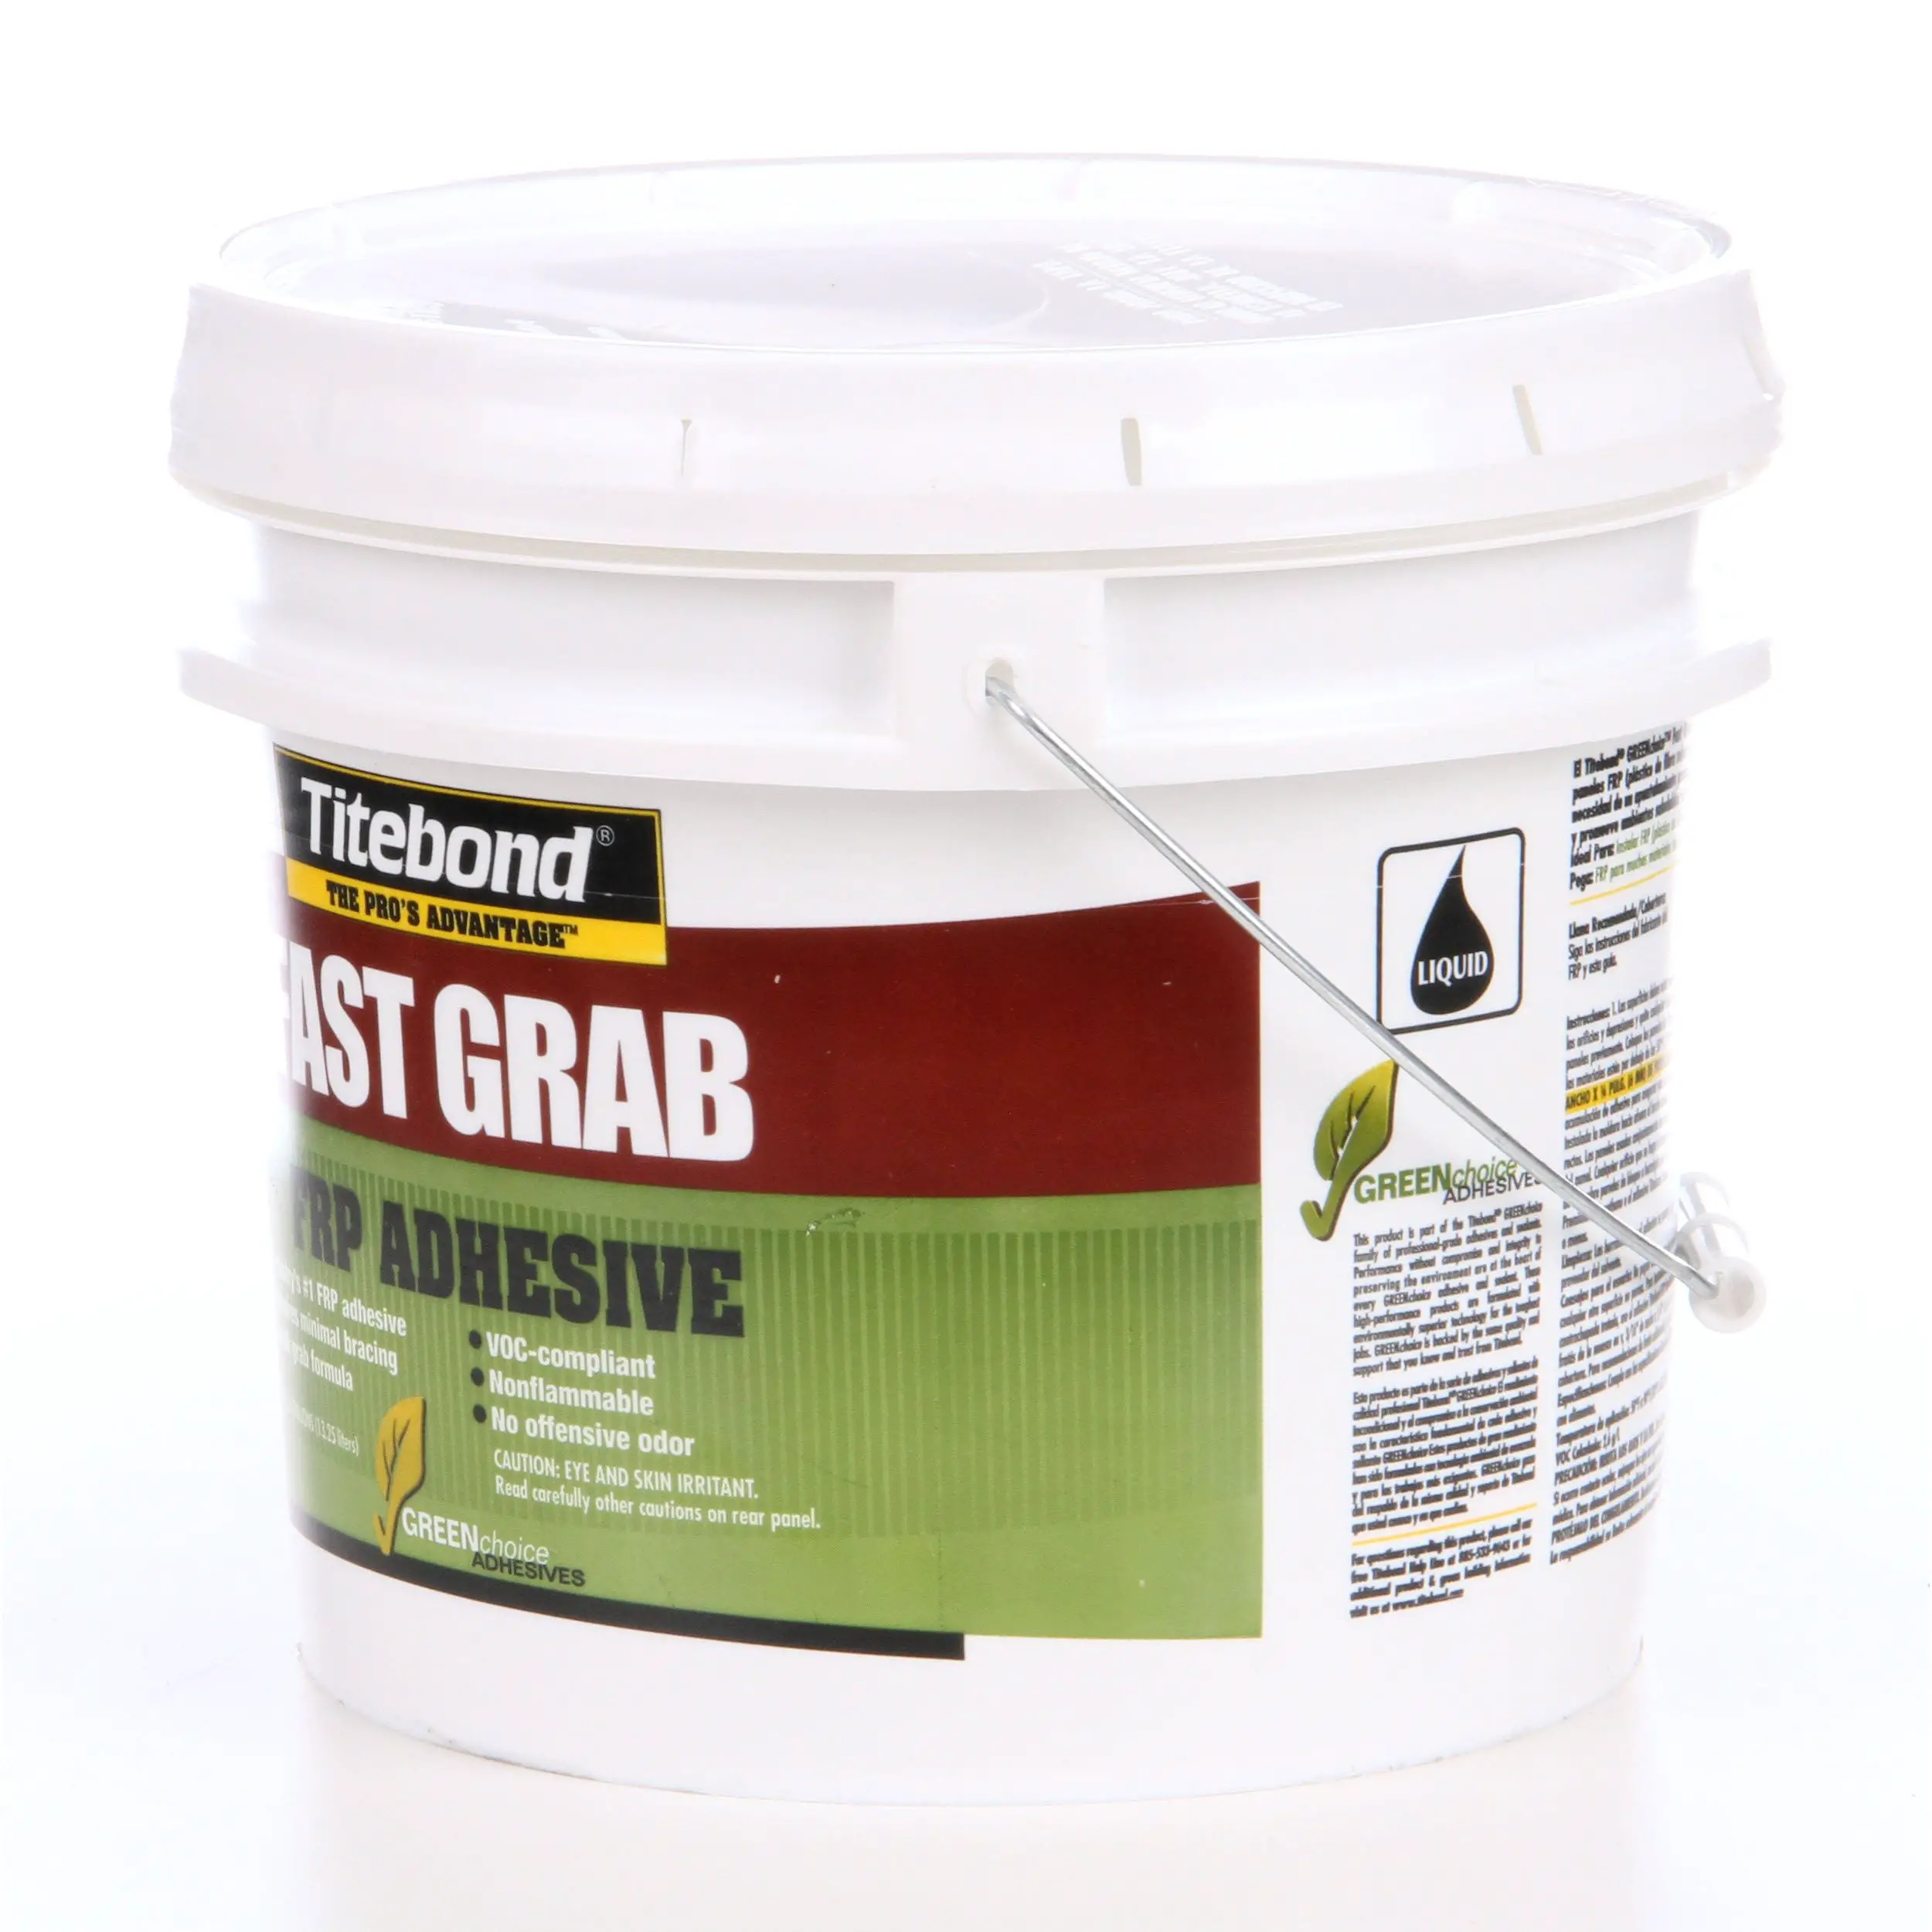 What Is The Best Adhesive For Frp